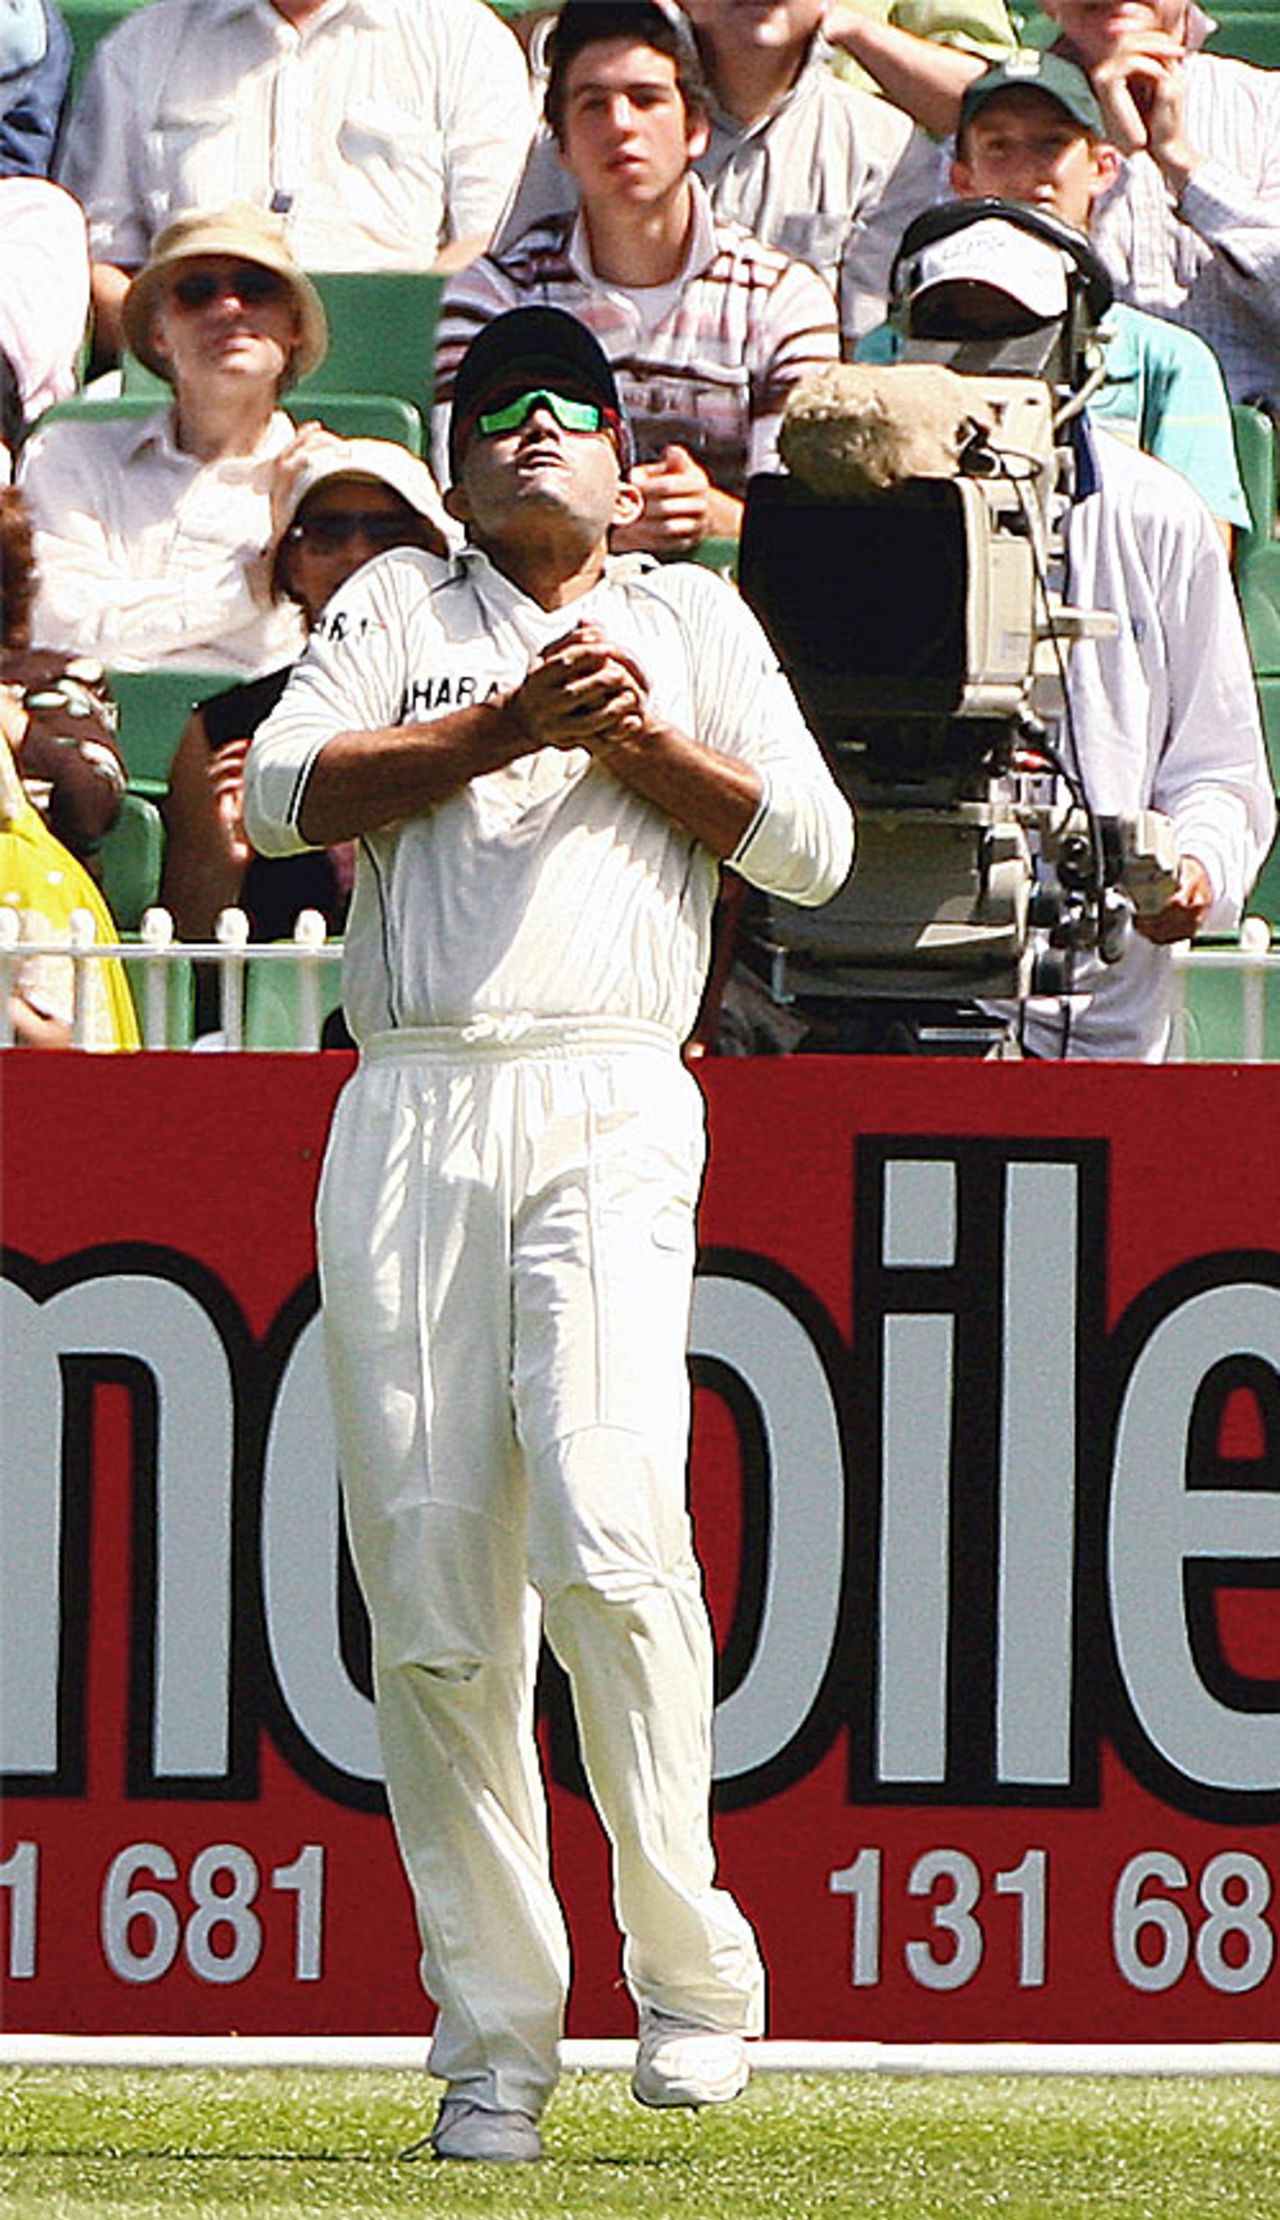 Sourav Ganguly watches the ball into his hands at mid-on, catching out Matthew Hayden, Australia v India, 1st Test, Melbourne, 3rd day, December 28, 2007